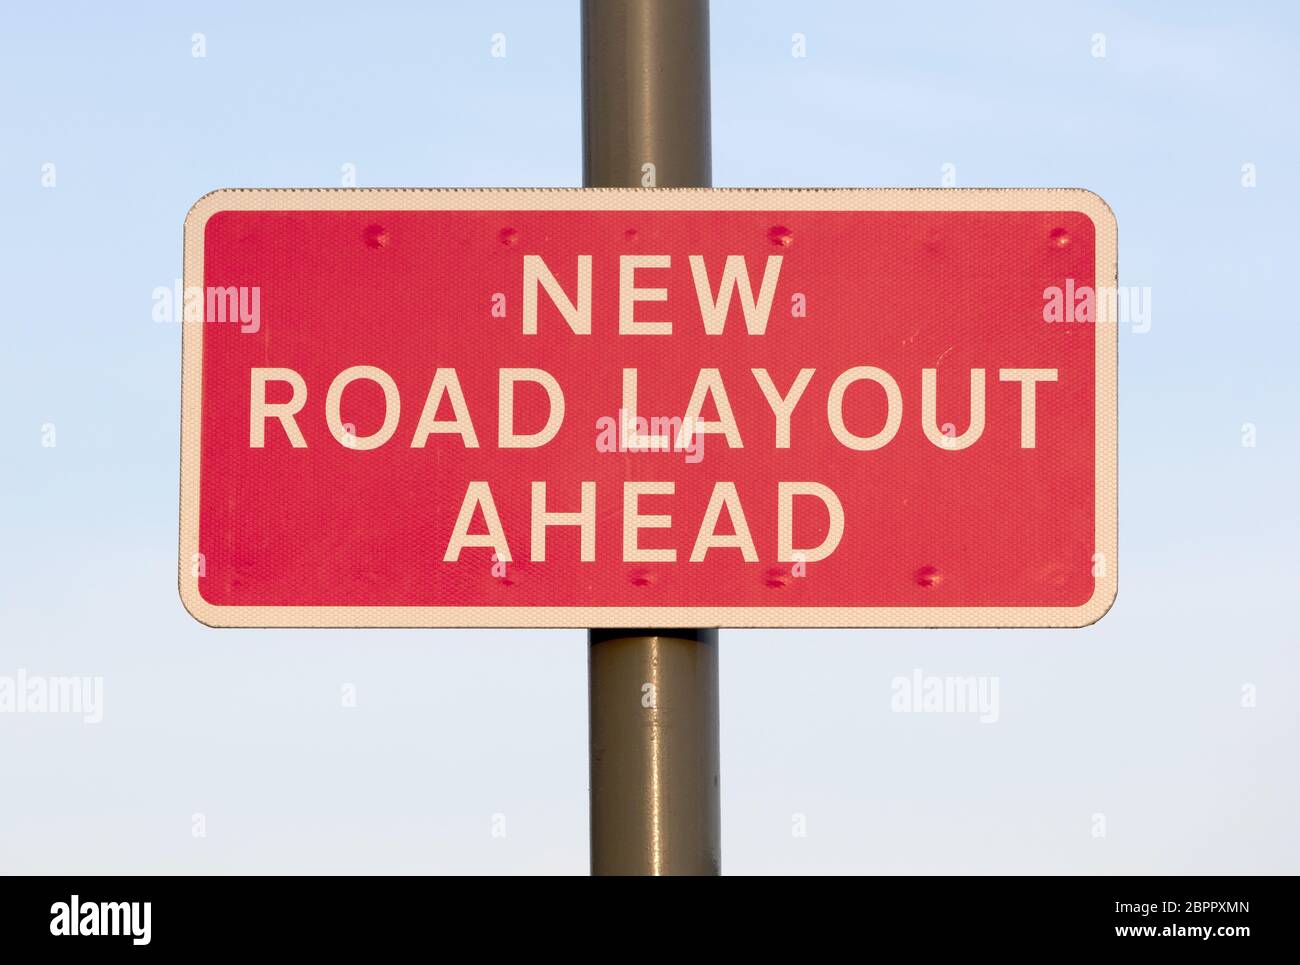 New road layout ahead sign in London Stock Photo